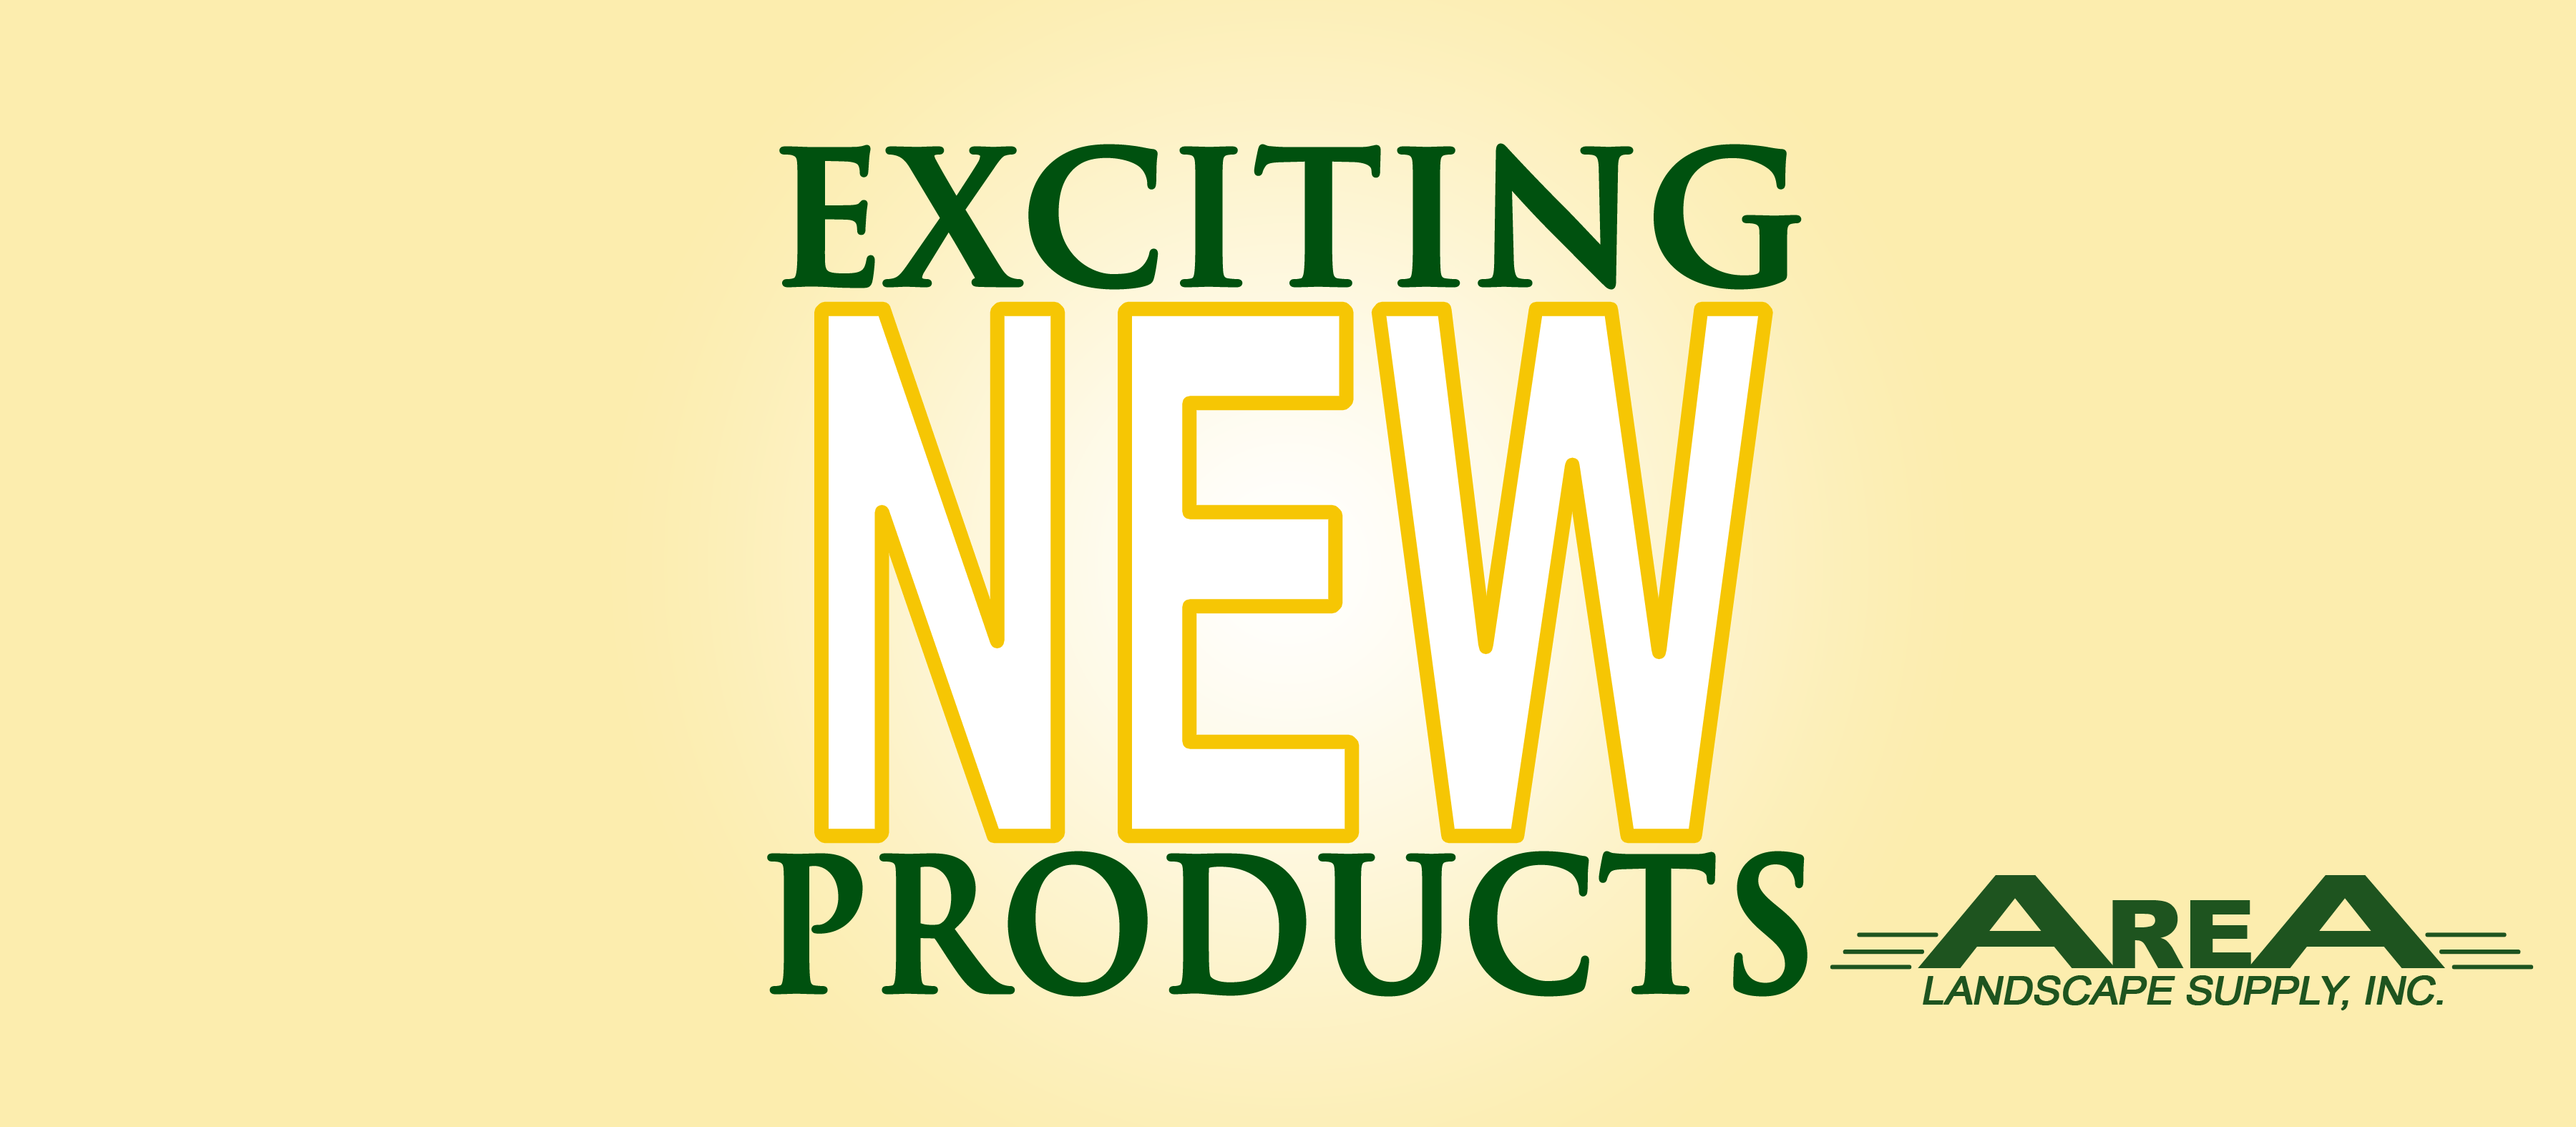 Exciting New Products at AreA Landscape Supply